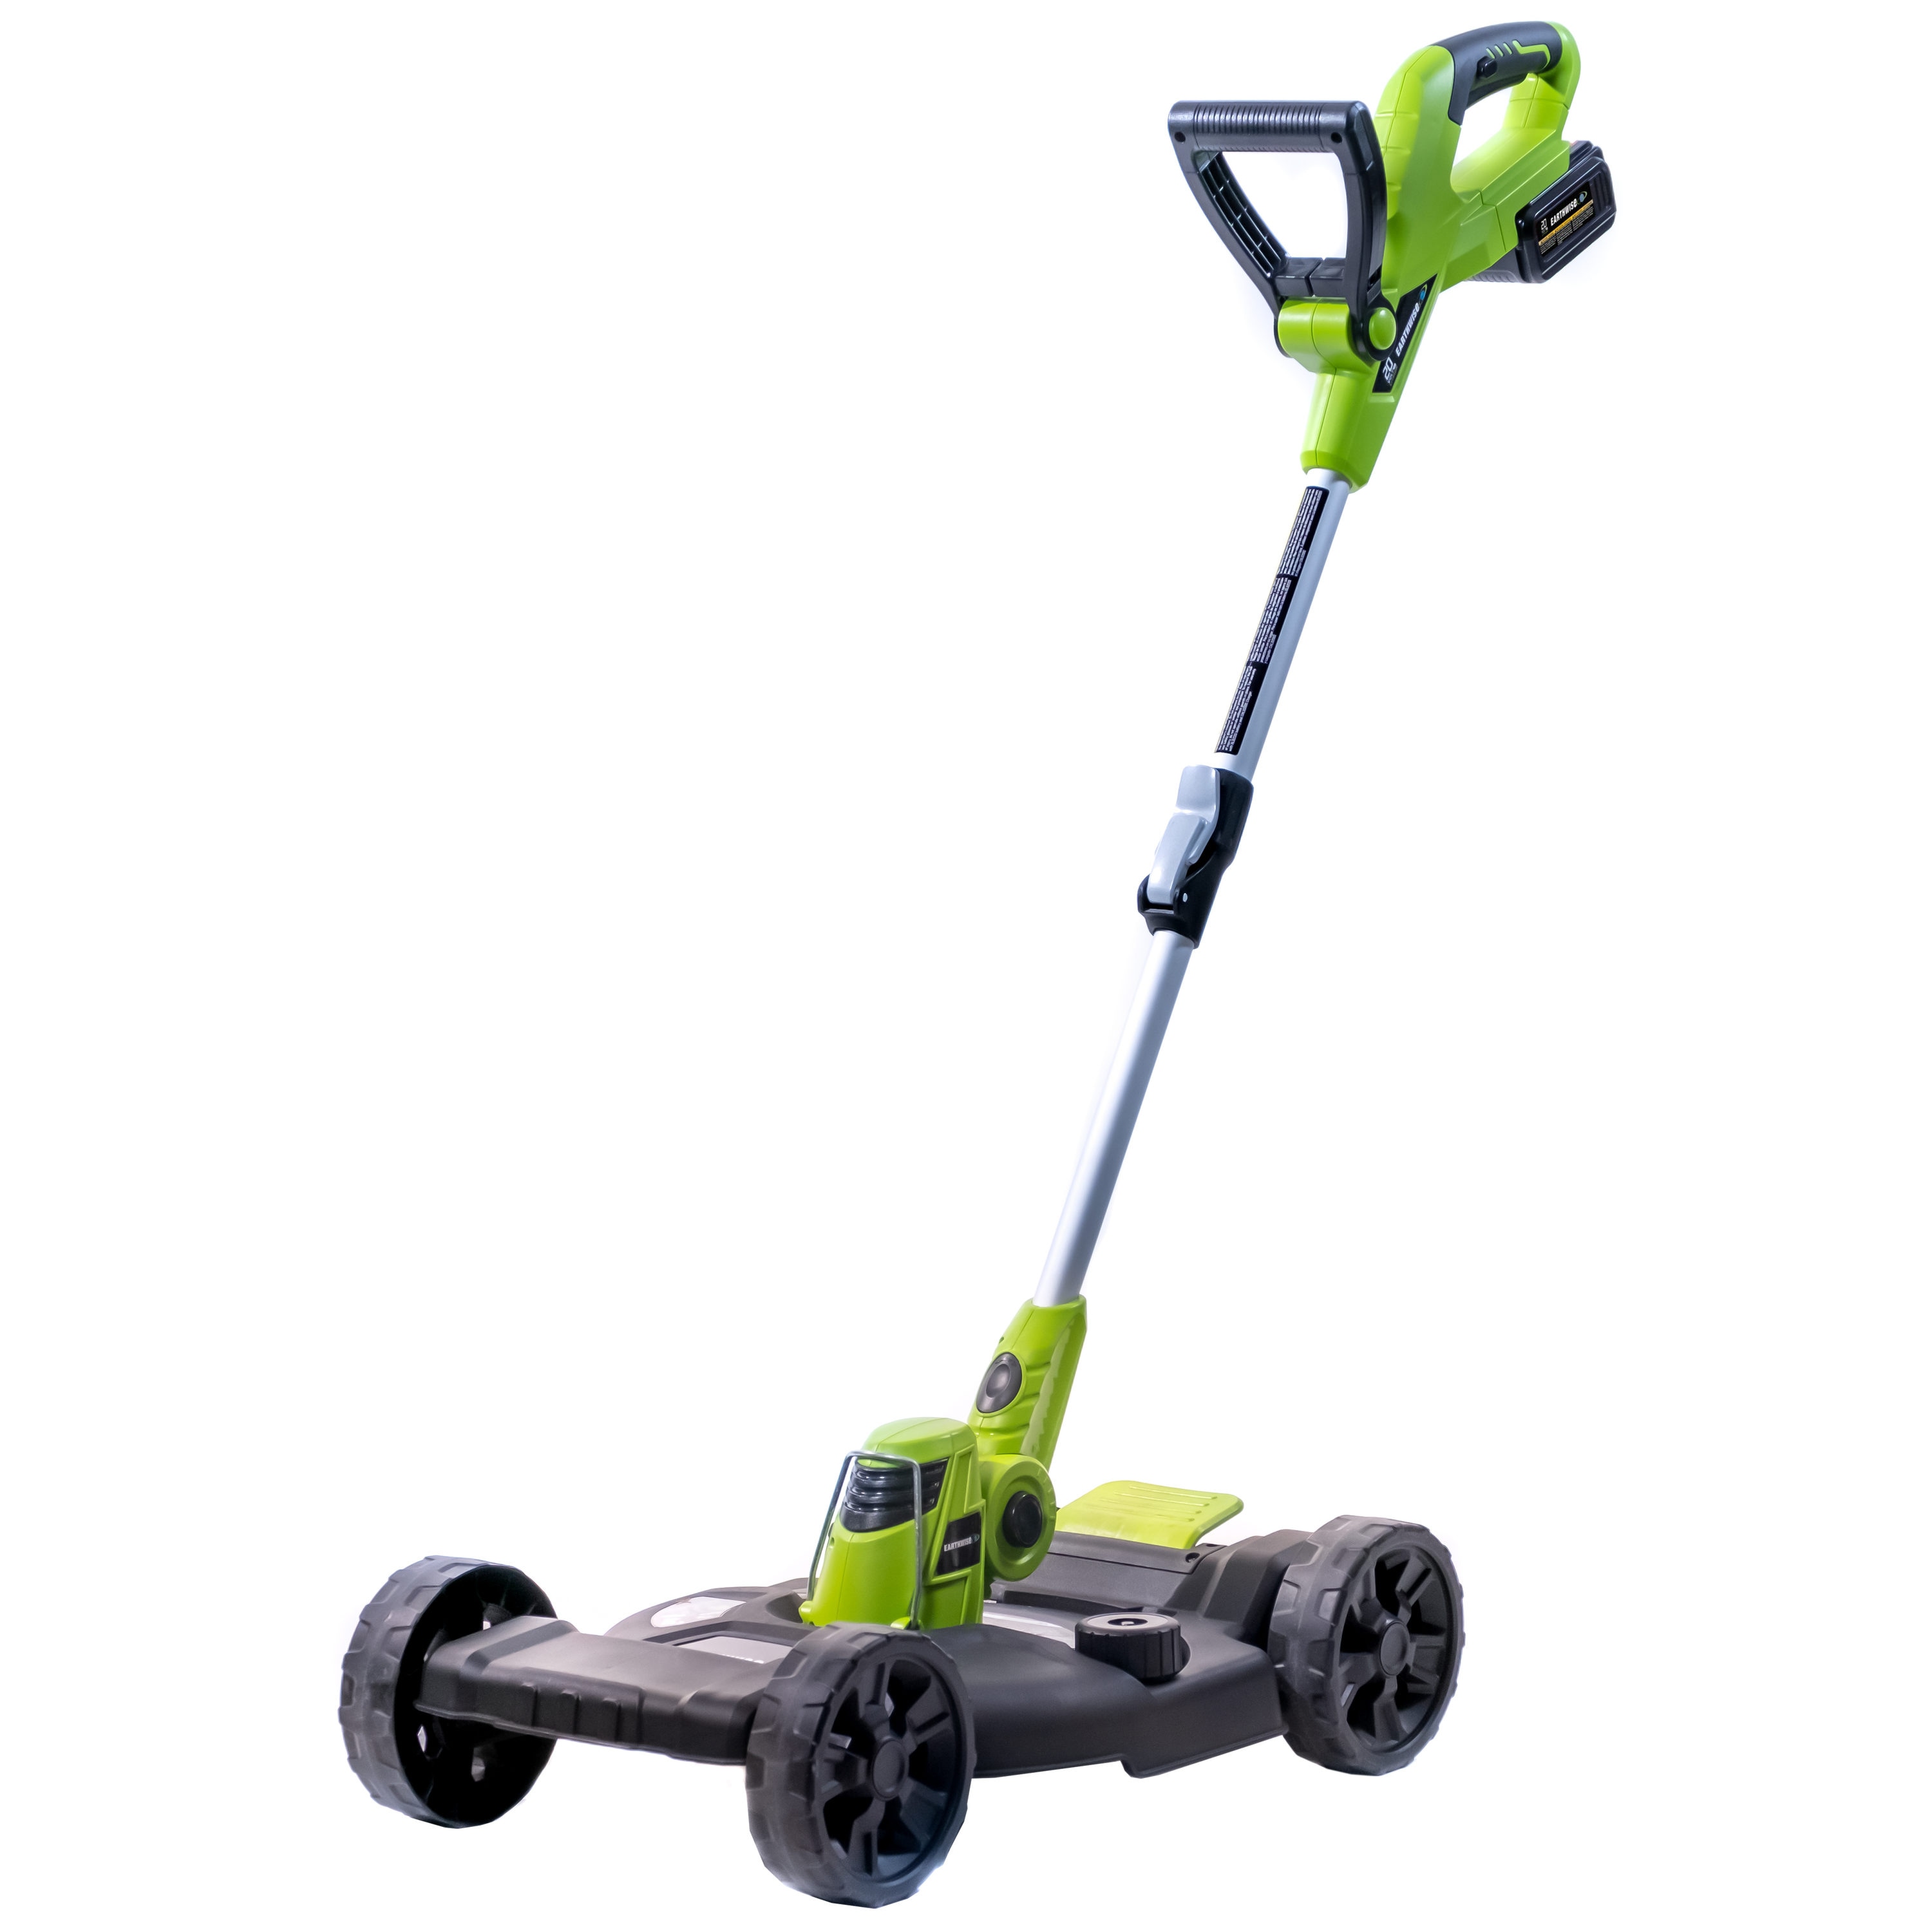 Removable Wheeled Deck for 12 in. Electric Straight Shaft Single Line  3-in-1 String Grass Trimmer/Lawn Edger/Push Mower